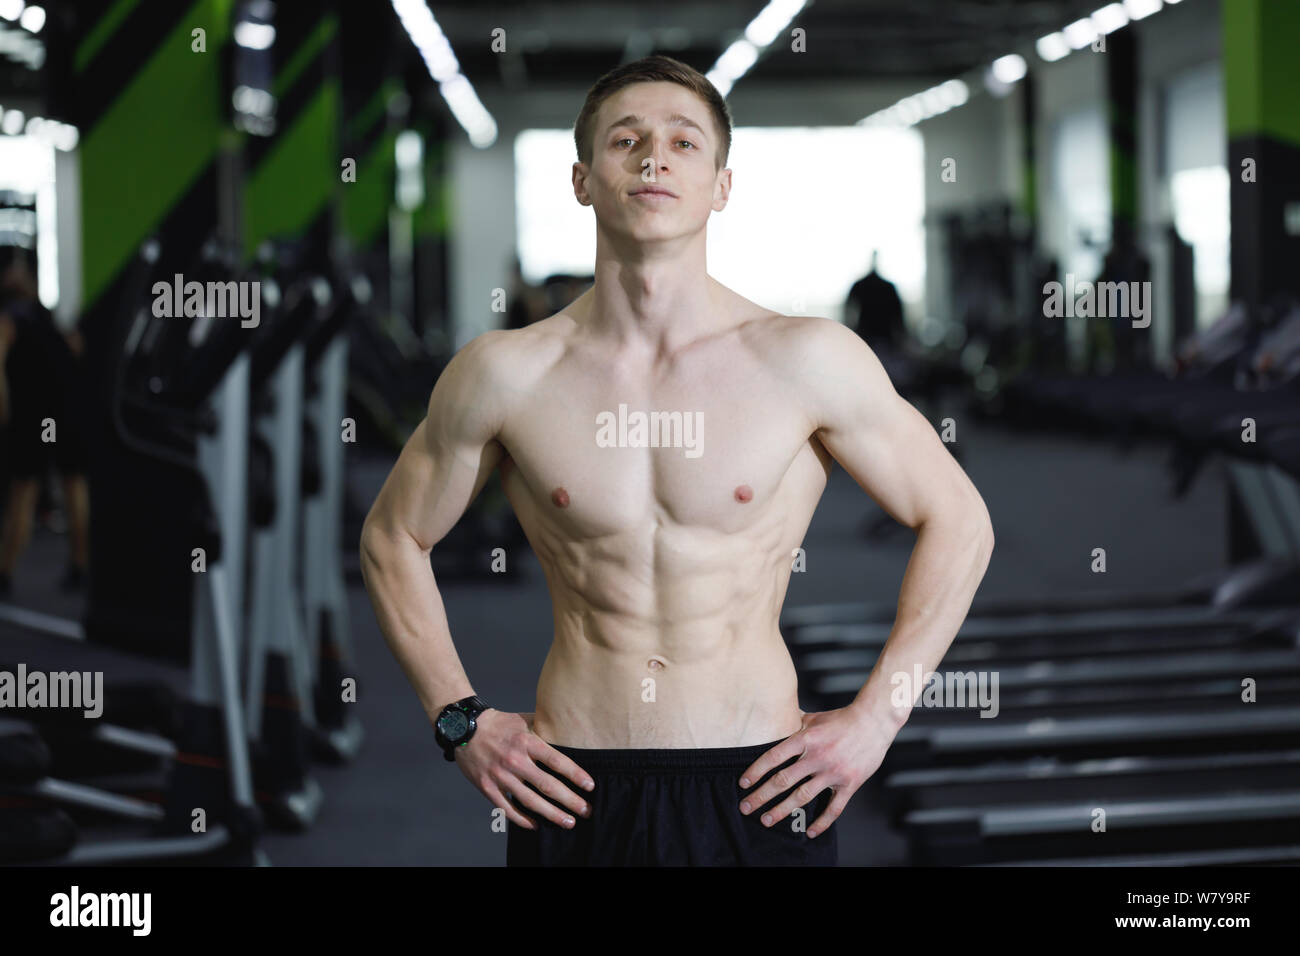 portrait-of-sportsman-with-perfect-body-standing-at-the-gym-after-workout-W7Y9RF.jpg